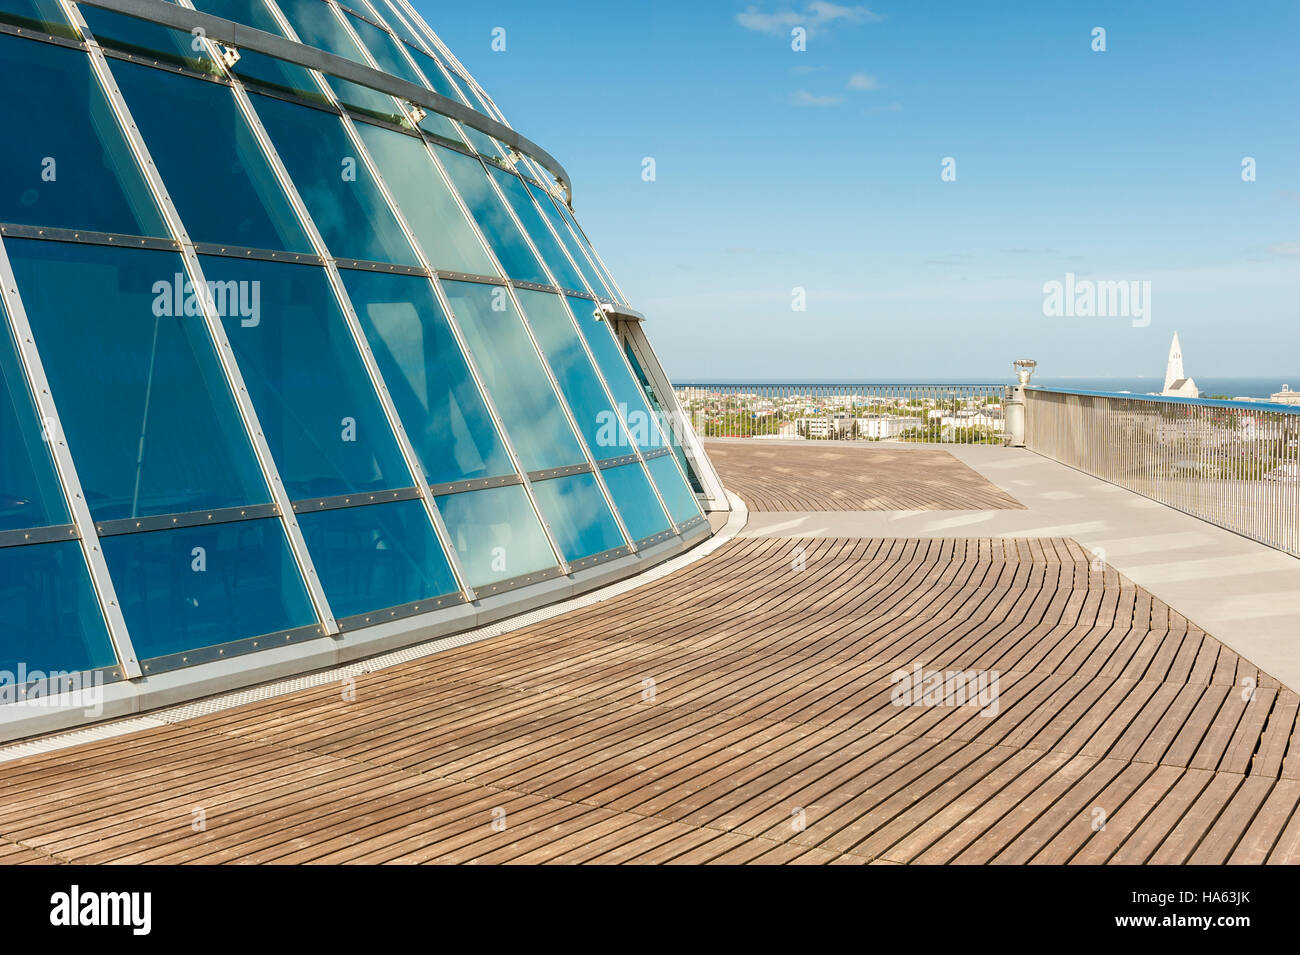 Perlan building dome and viewing deck overlooking Reykjavik, Iceland Stock Photo